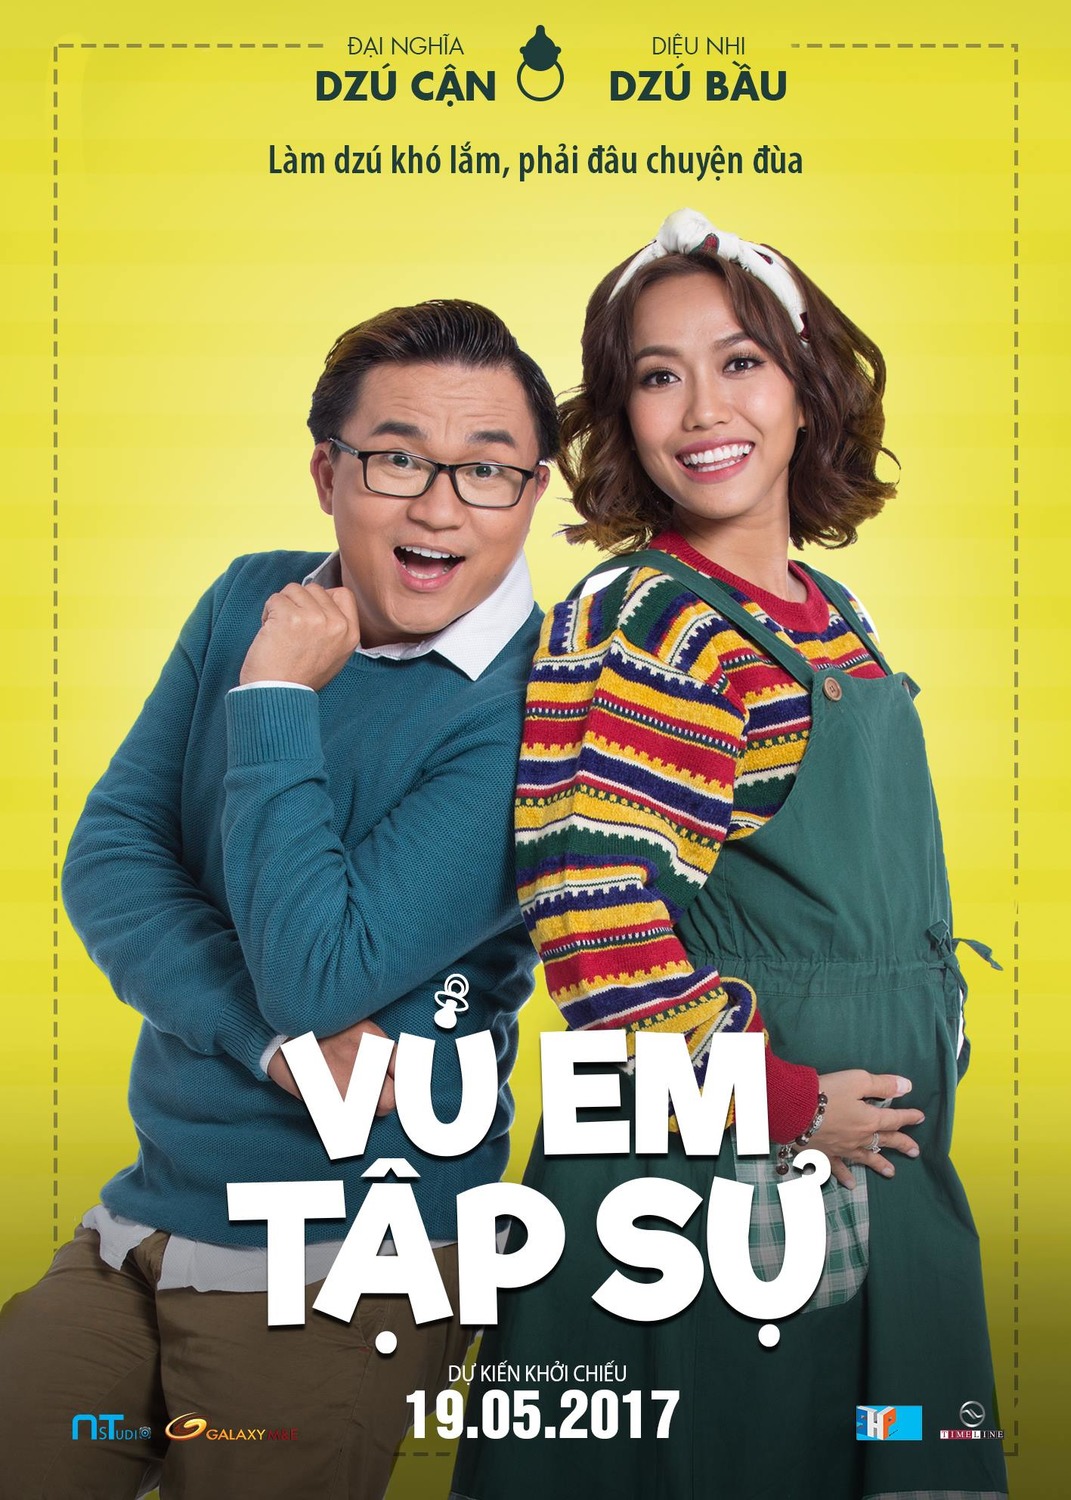 Extra Large Movie Poster Image for Vu em tap su (#6 of 6)